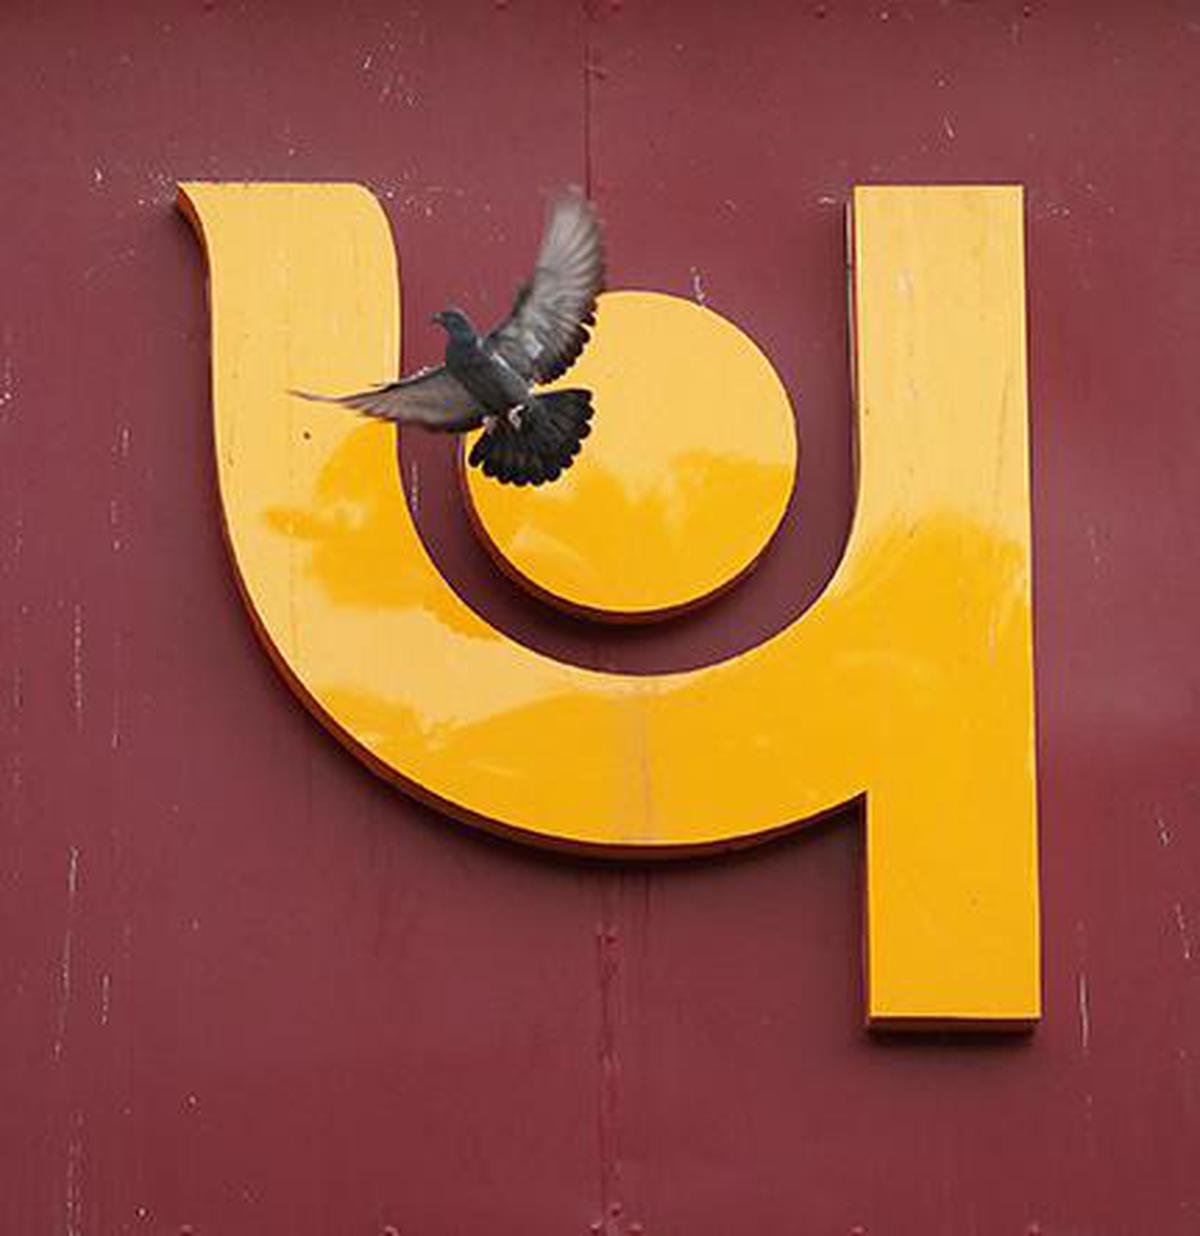 PNB fraud: efforts on to recover transaction details of accused